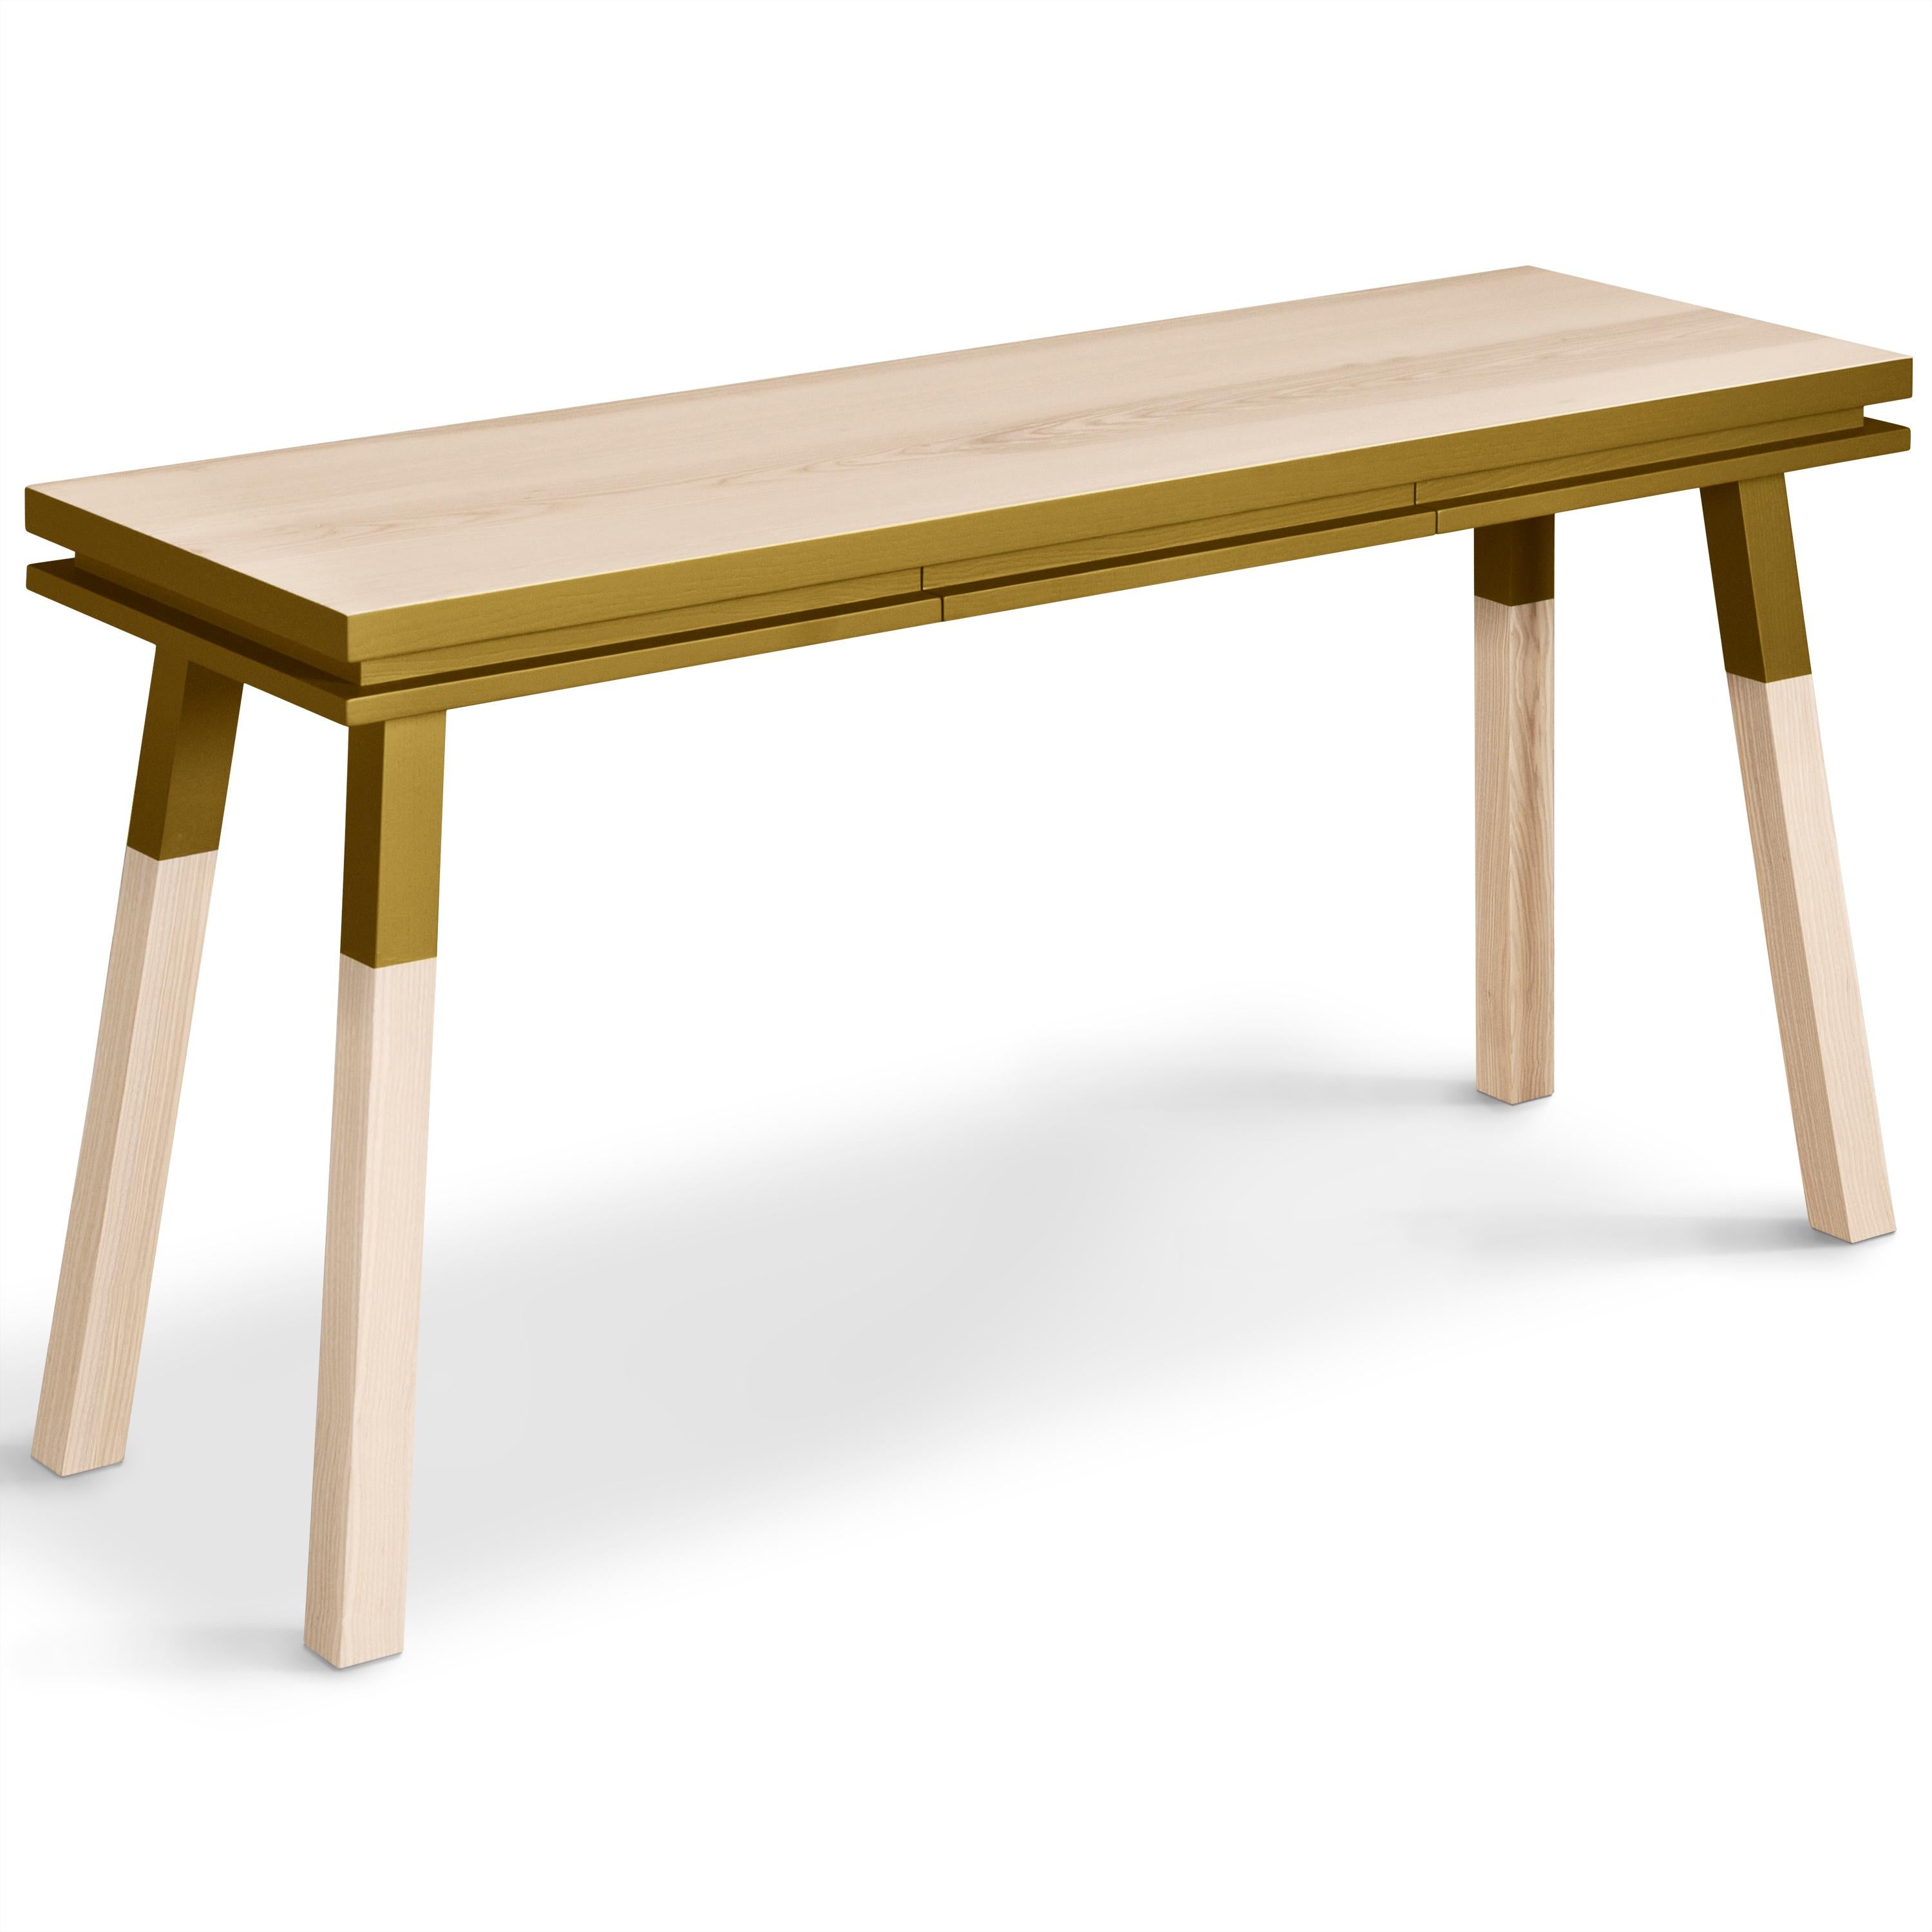 Hand-Crafted Rectangular Desk Table, Scandinavian Design by Eric Gizard, Paris, 11 Colours For Sale